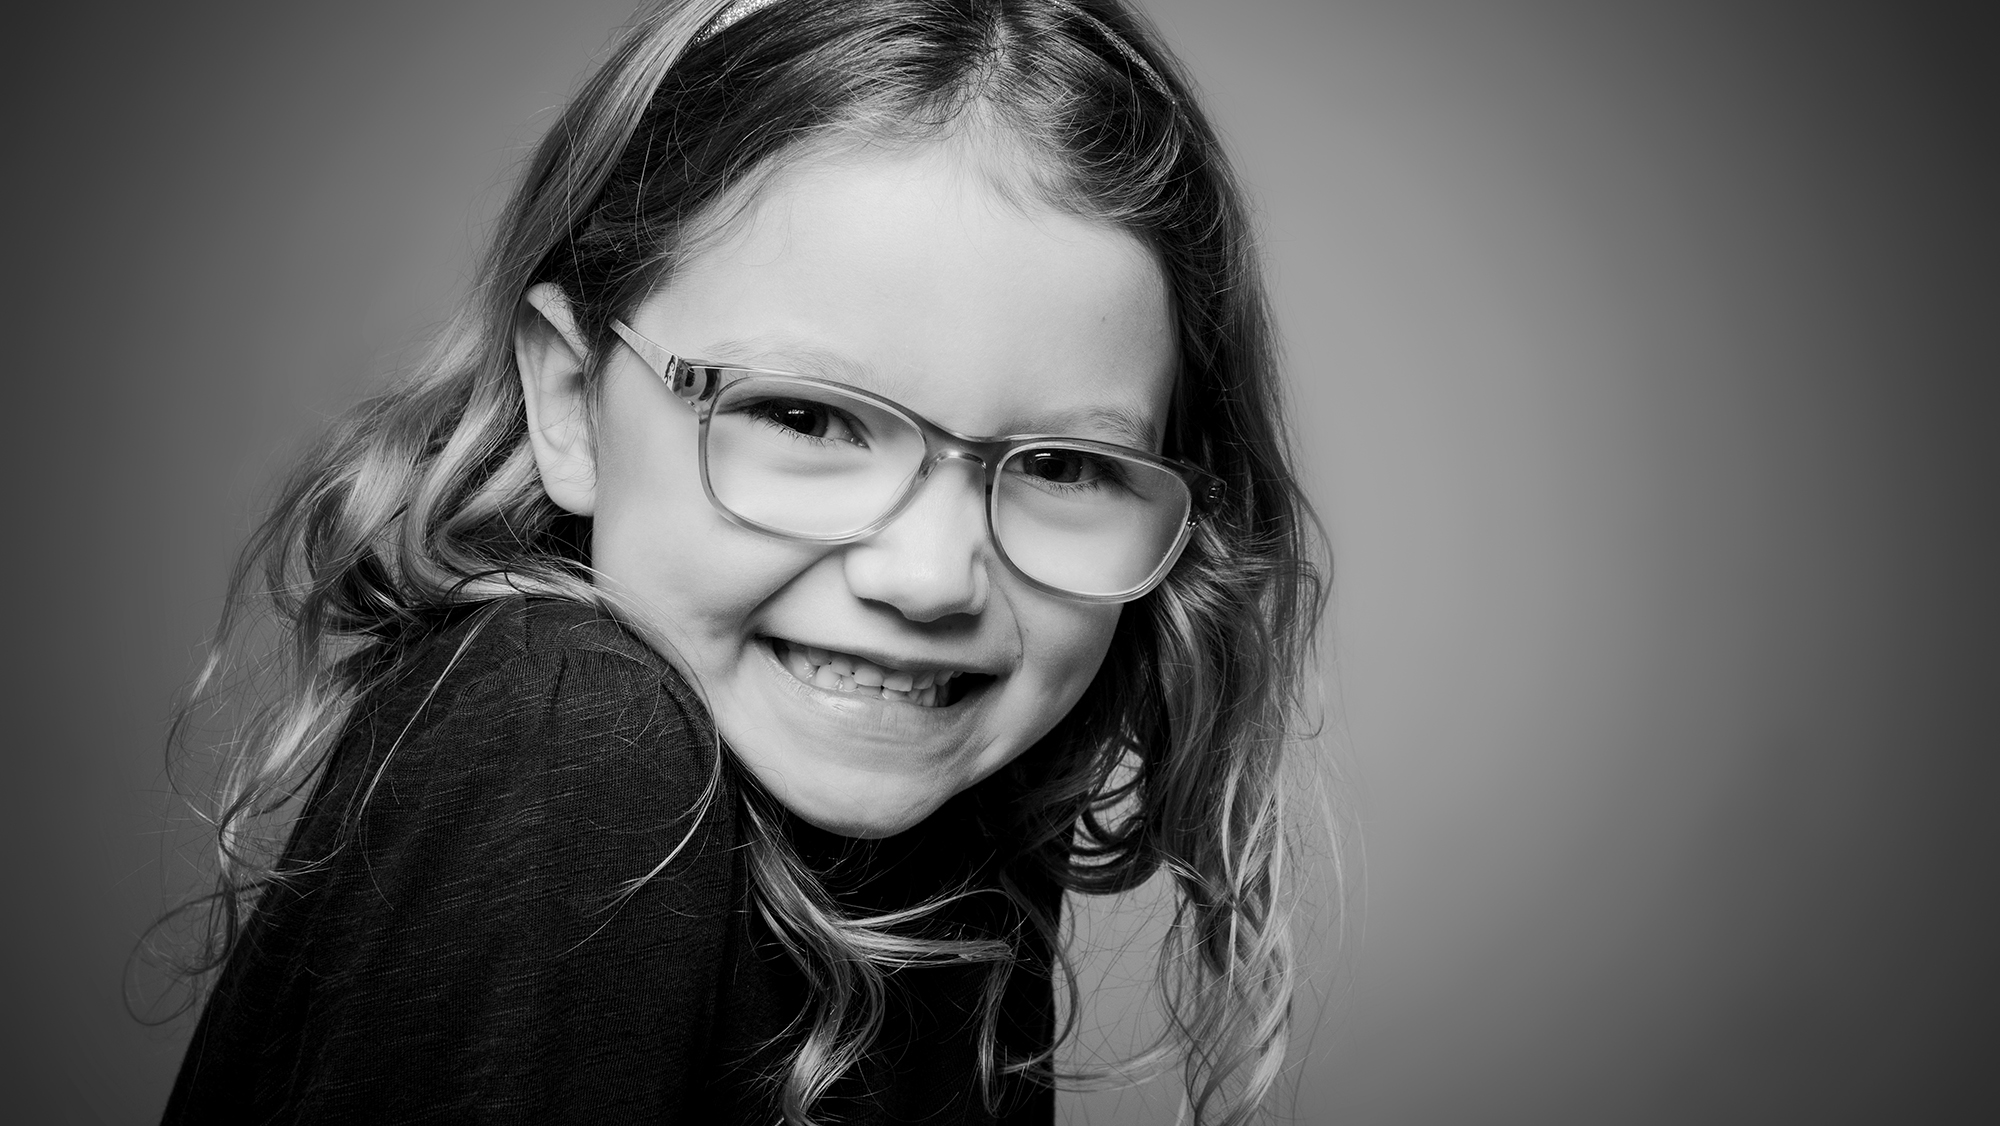 Black and White picture of a little girl smiling